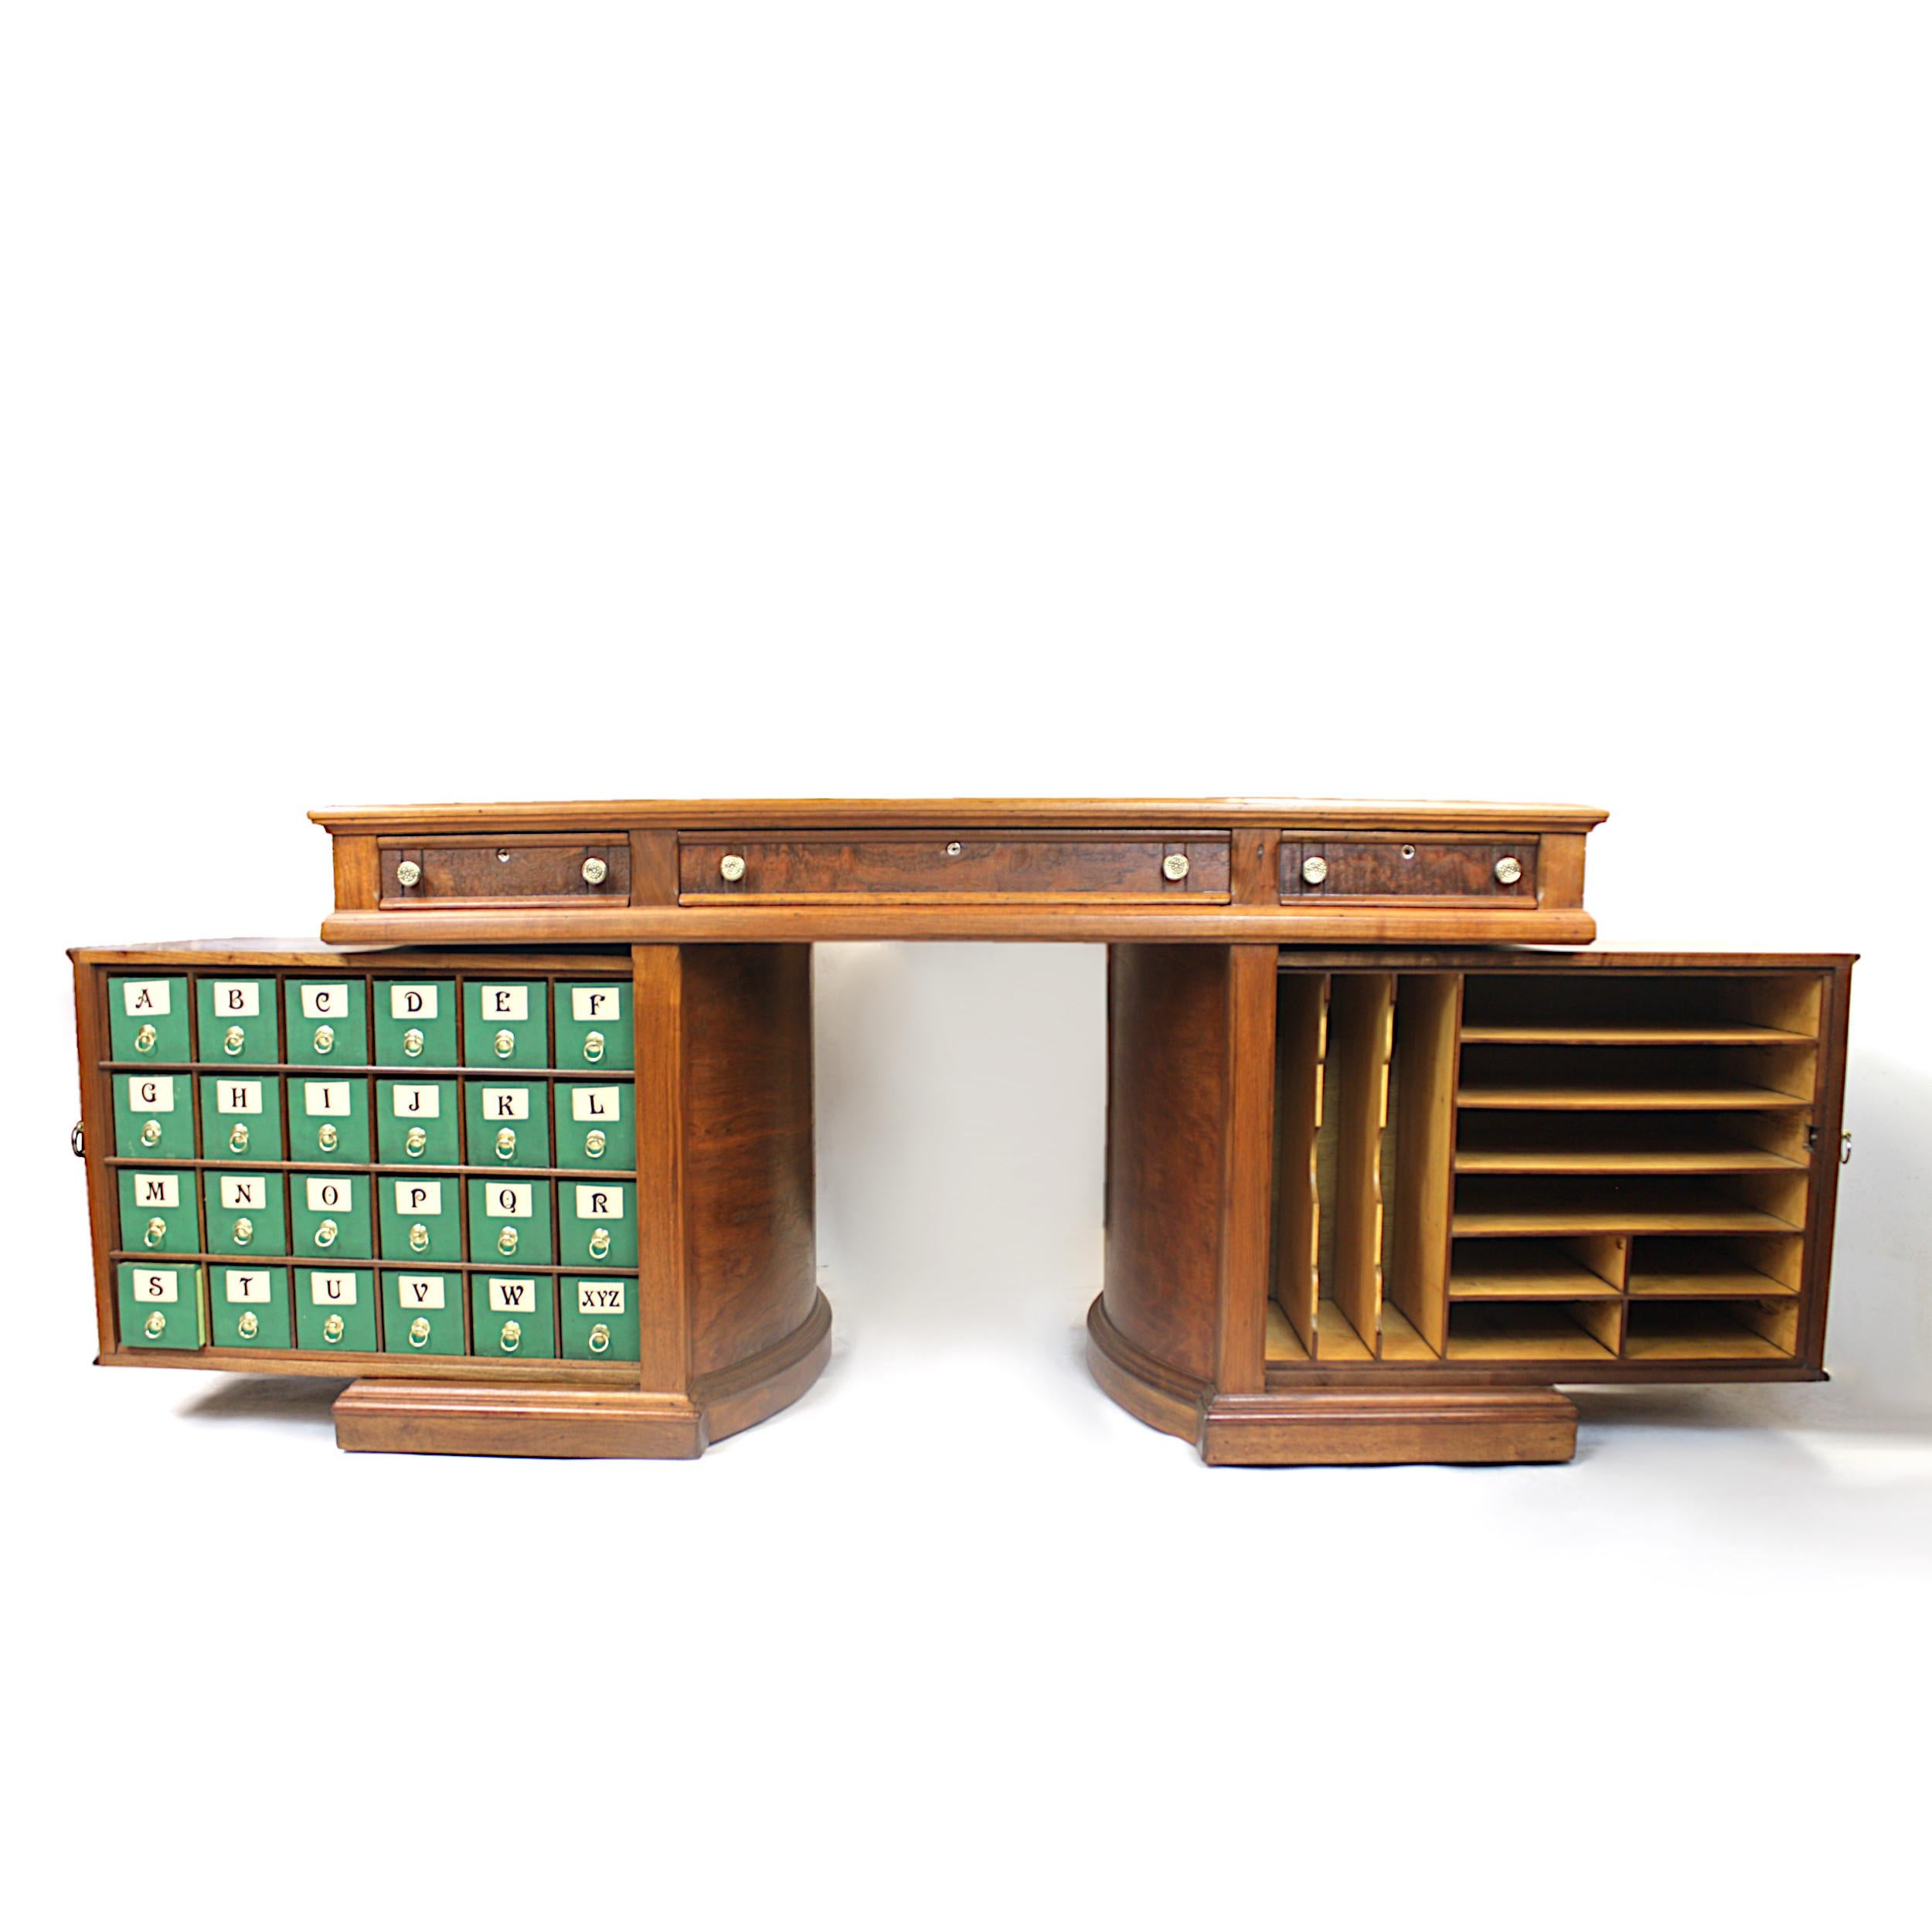 This is a rare model No. 8 Rotary desk in the Queen Anne style made by the Wooton Desk Manufacturing Co. of Indianapolis Indiana. Desk features solid, burled walnut construction, leather, top, brass hardware, and those unique, Wooton rotating cases!